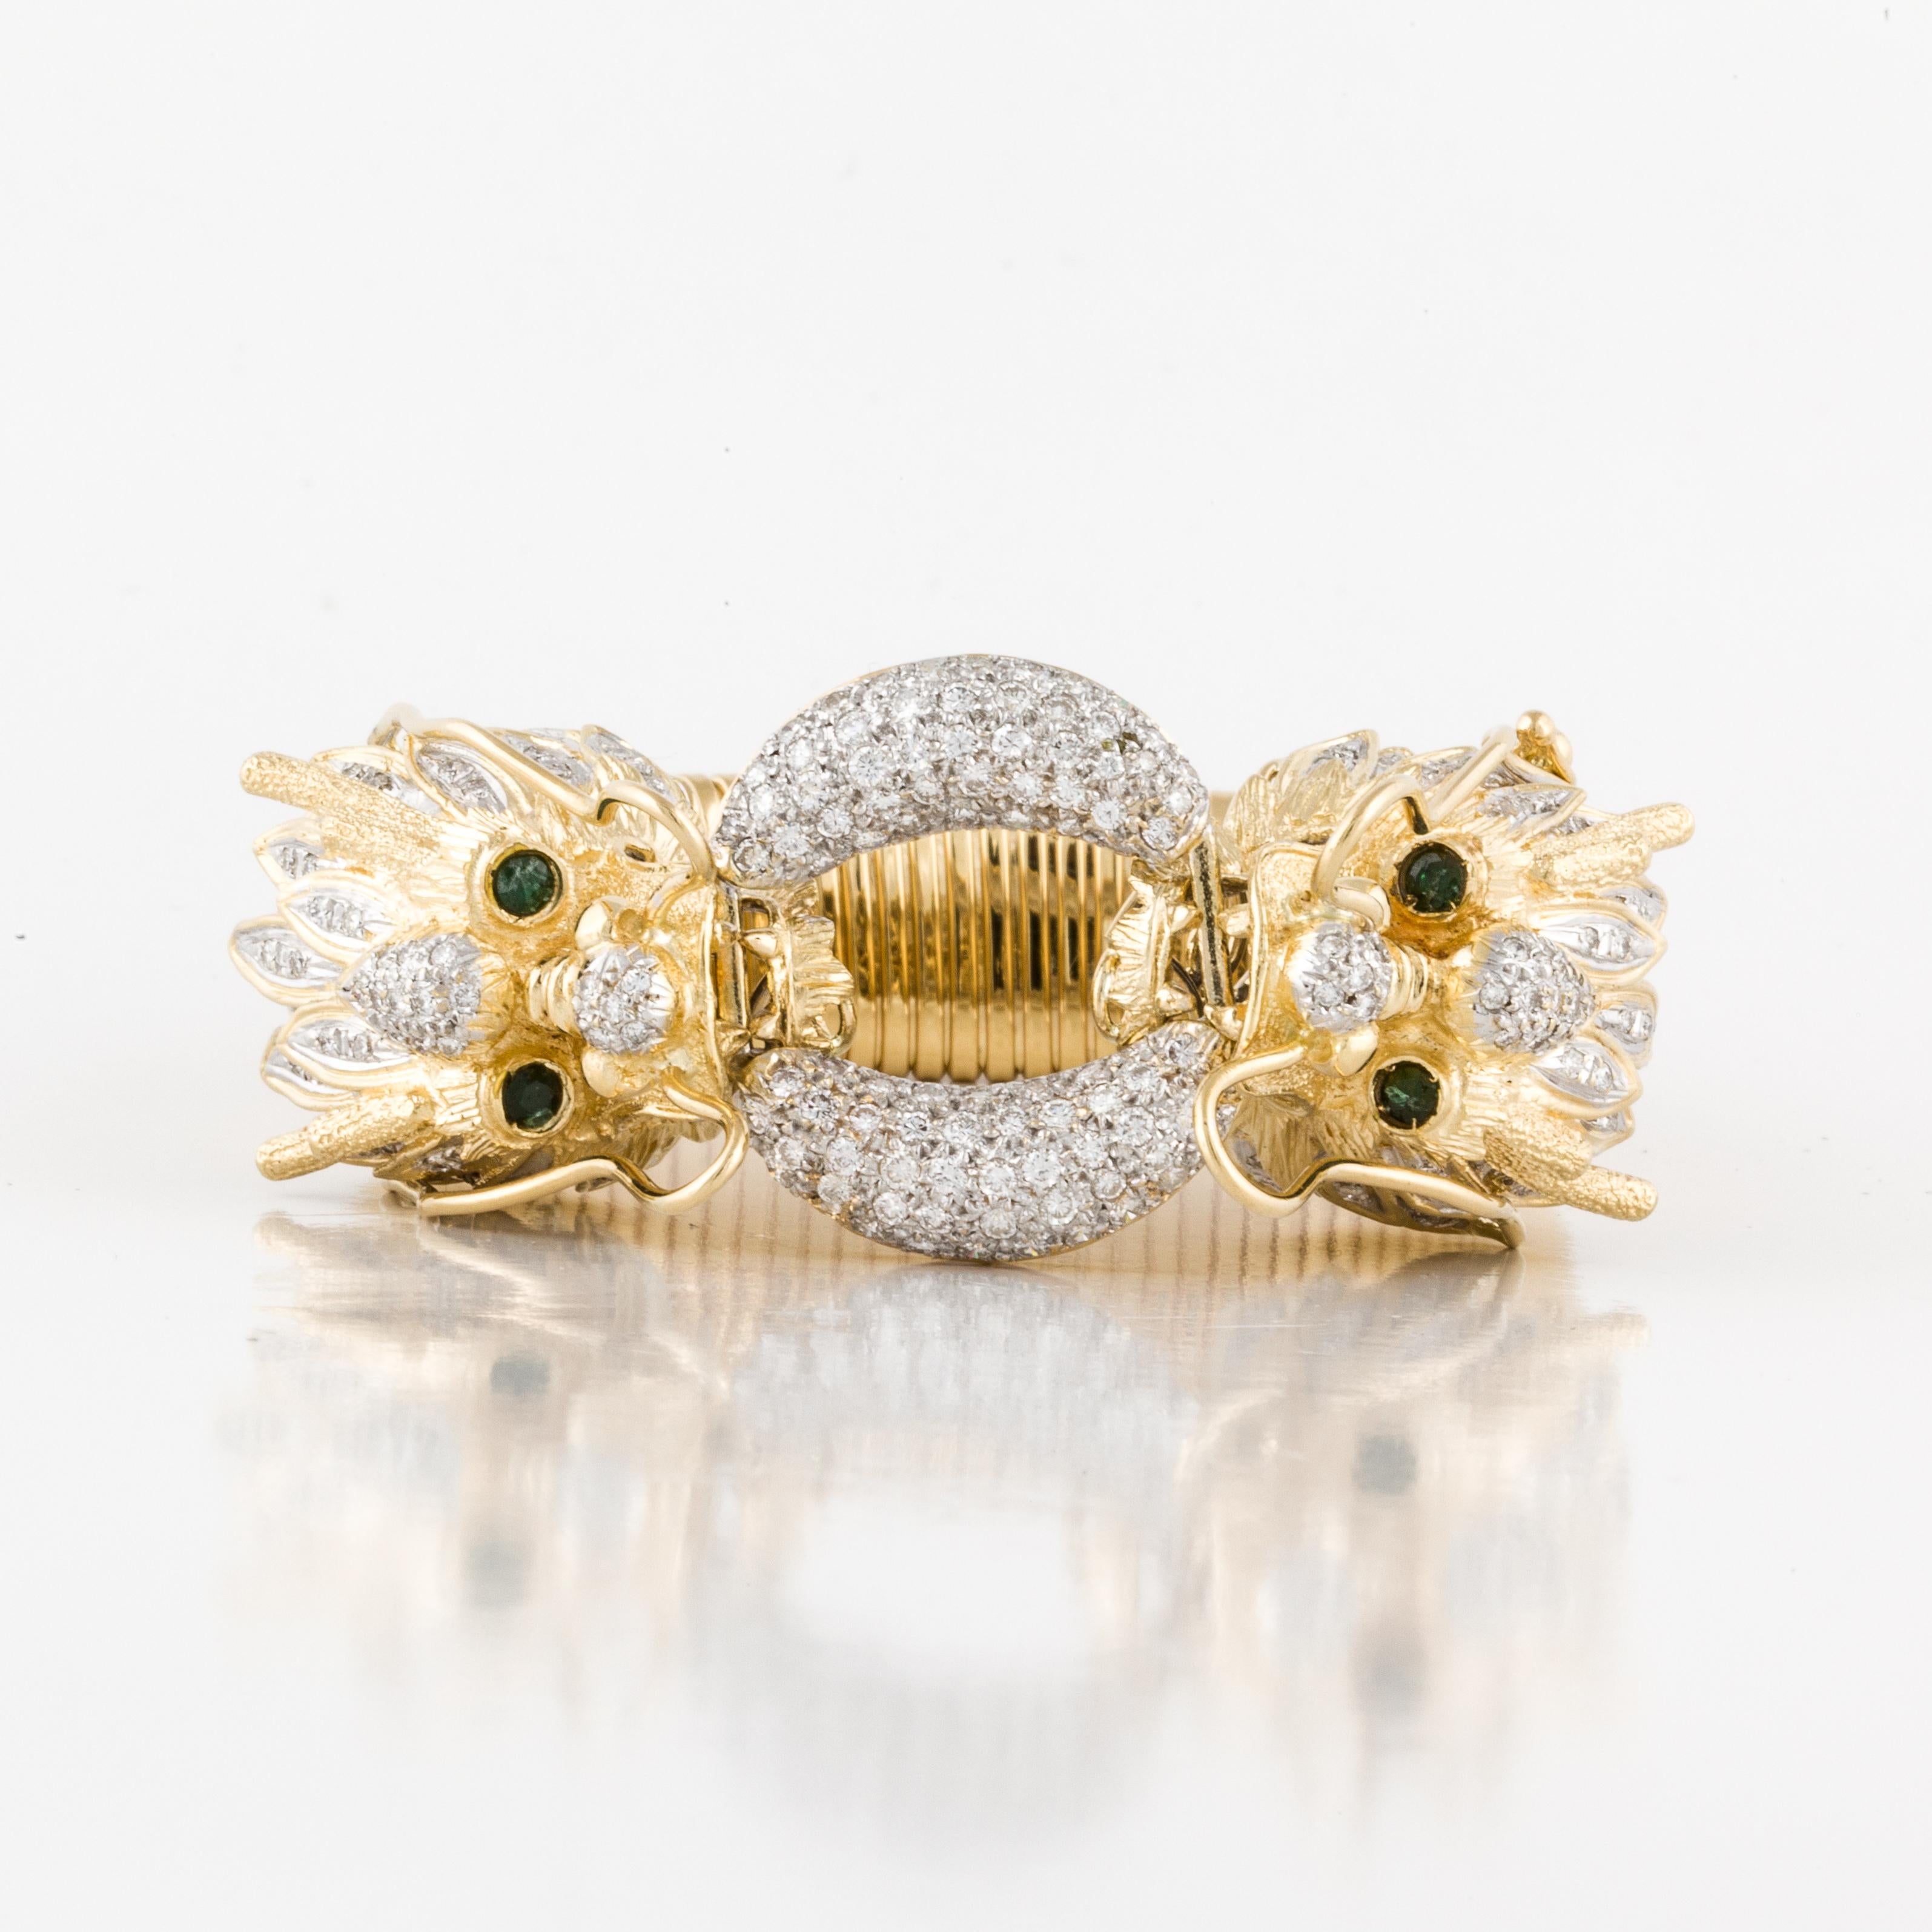 This bracelet is 18K yellow gold featuring two dragon heads facing each other.  There are a total of 224 round diamonds totaling 3.65 carats; G-I color and VS clarity.  There are also four round emeralds representing the eyes.  The bracelet measures